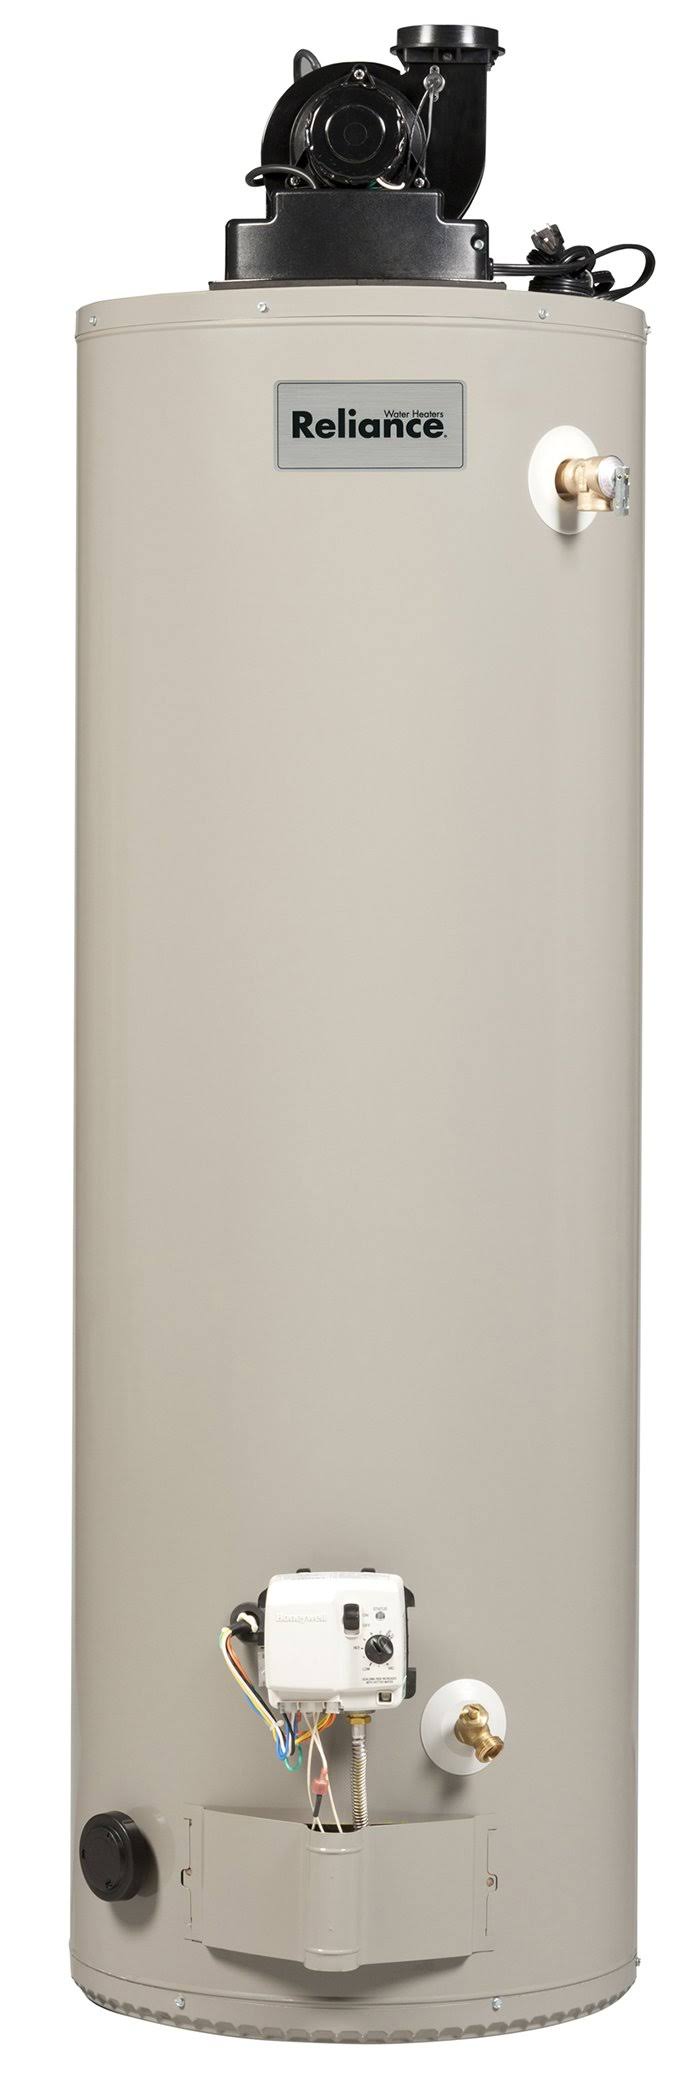 Reliance 50gal Natural Gas Water Heater with Power-Vent, 6 50 YRVIT